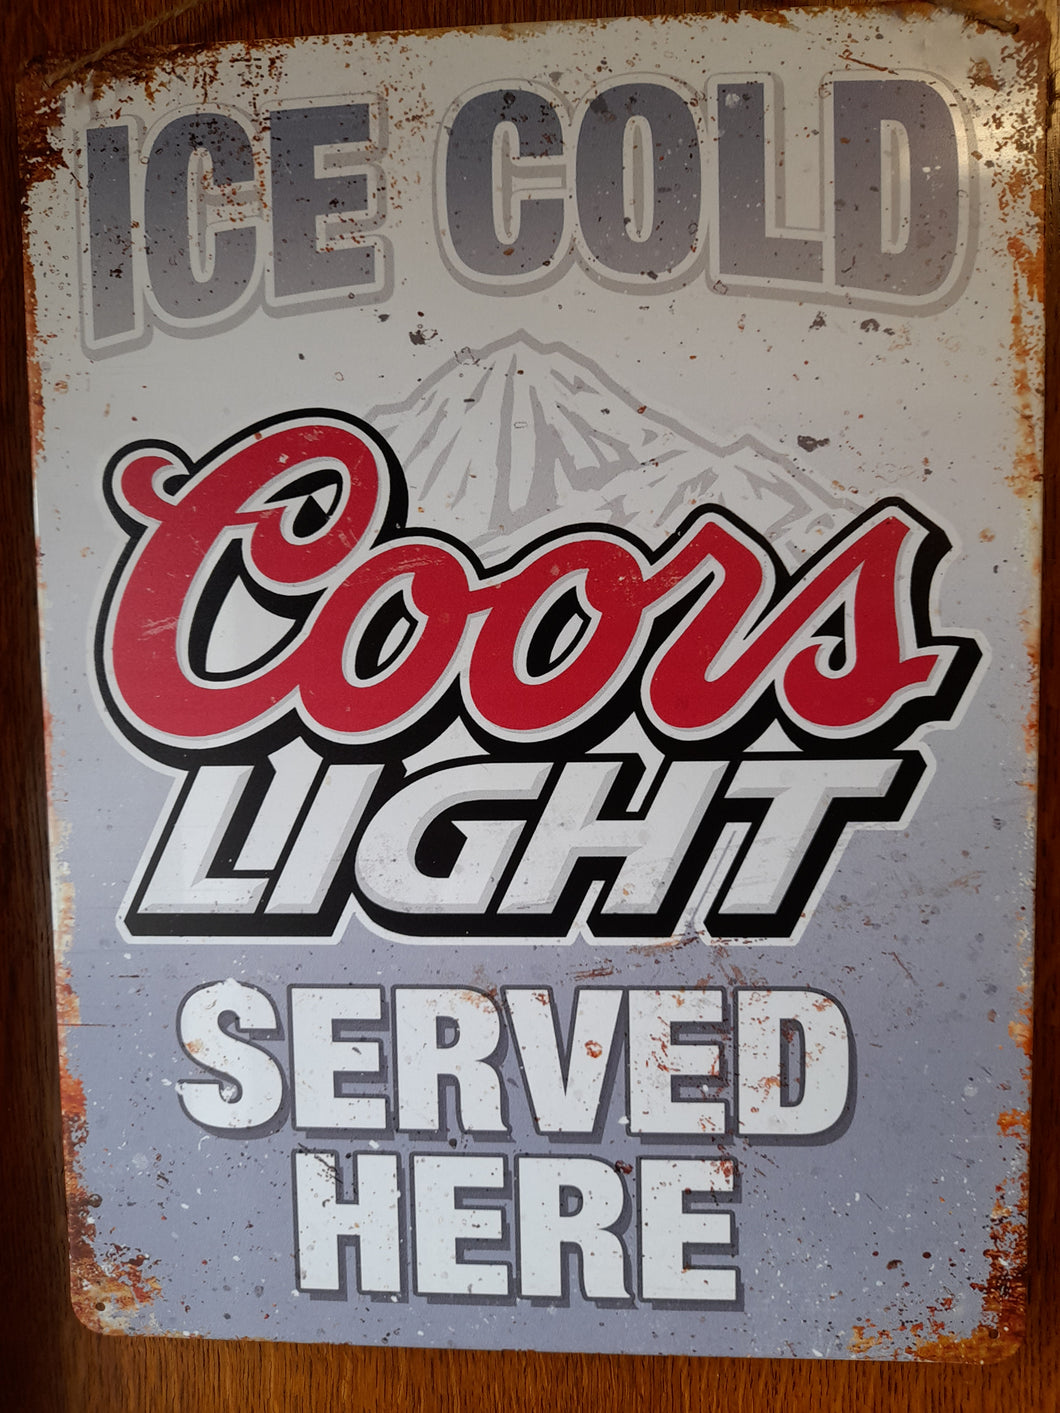 Iced cold Light Coors served here  - vintage style bar sign